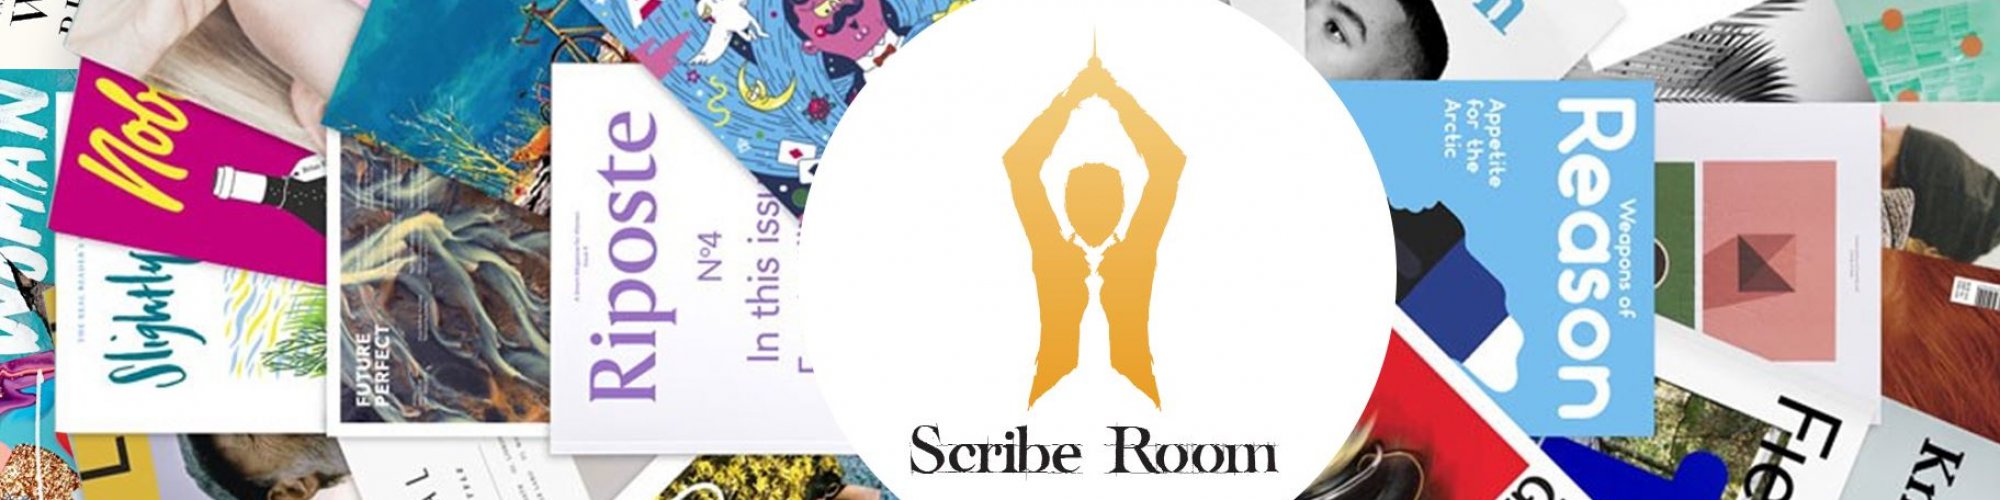 Scribe Room